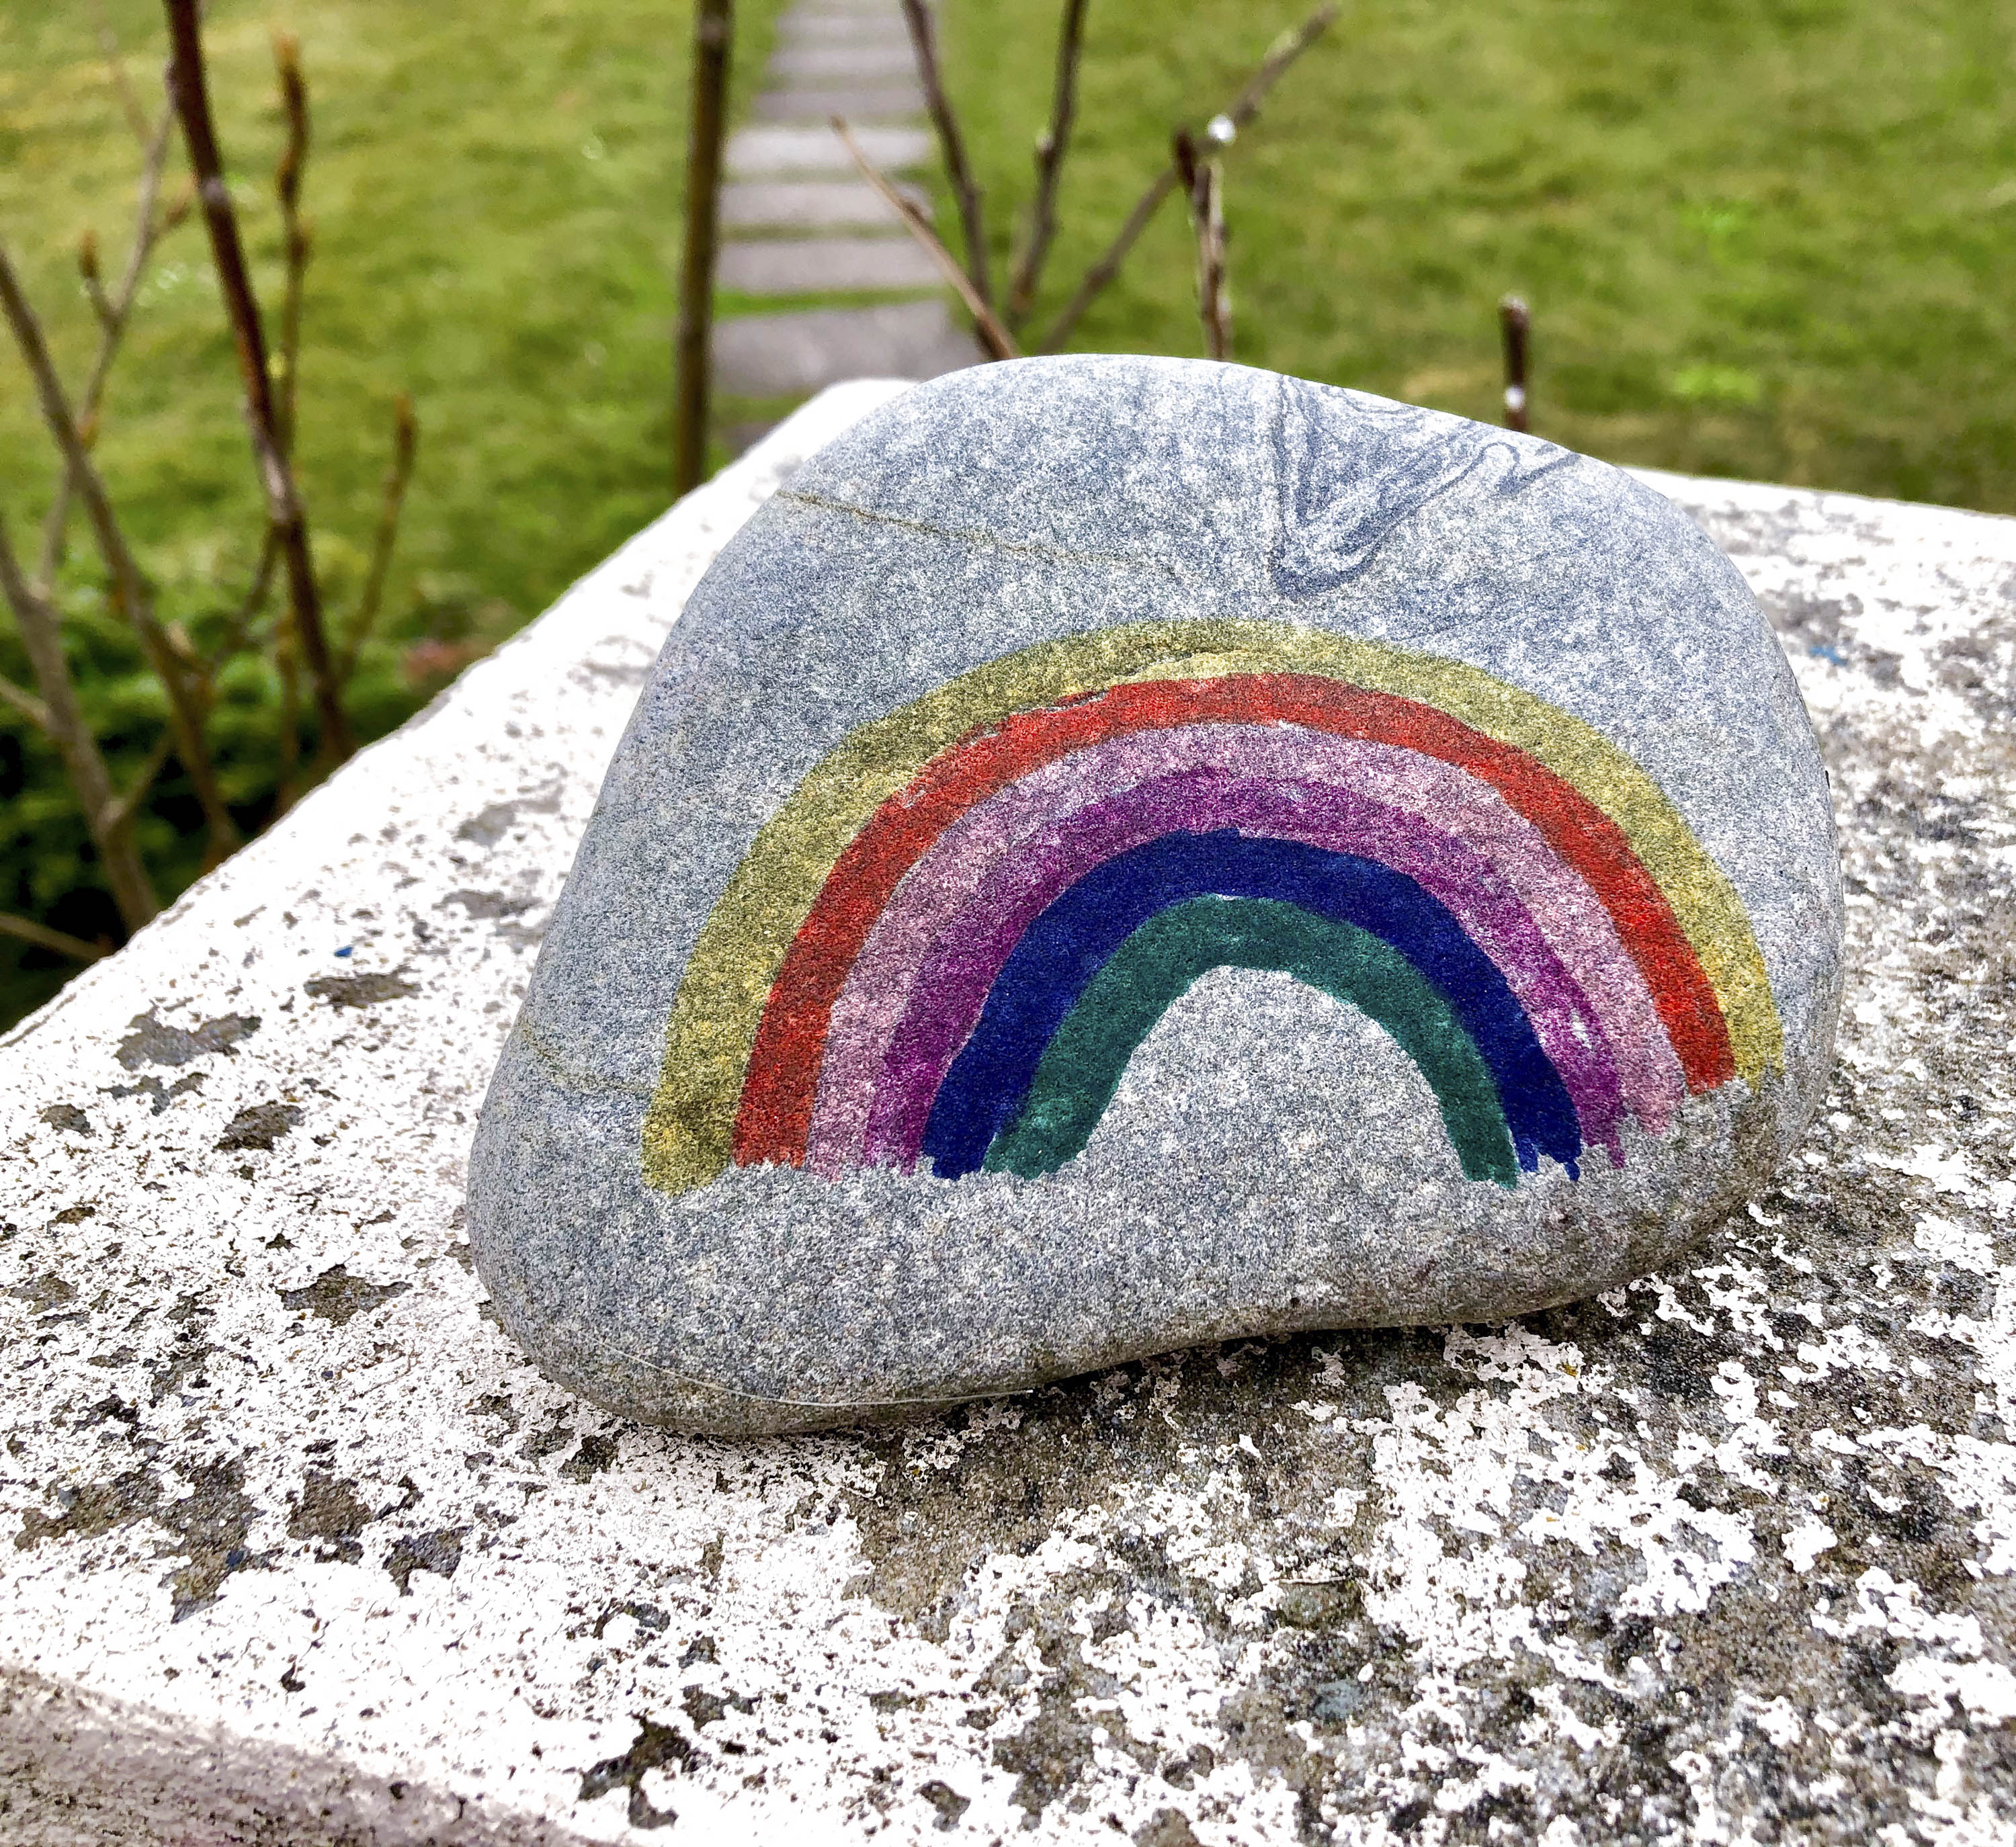 Beach pebble decorated with a rainbow, from Hoswick, Shetland. X.2020.51. (© Neila Kalra) The rainbow has a long history as a symbol of hope and quickly became one of the defining images of the pandemic, with colourful pictures adorning windows across Europe. Painted pebbles were placed on doorsteps and in some impressively long ‘covid snakes’, winding their way through public spaces. This pebble was collected and decorated by the Wood family.